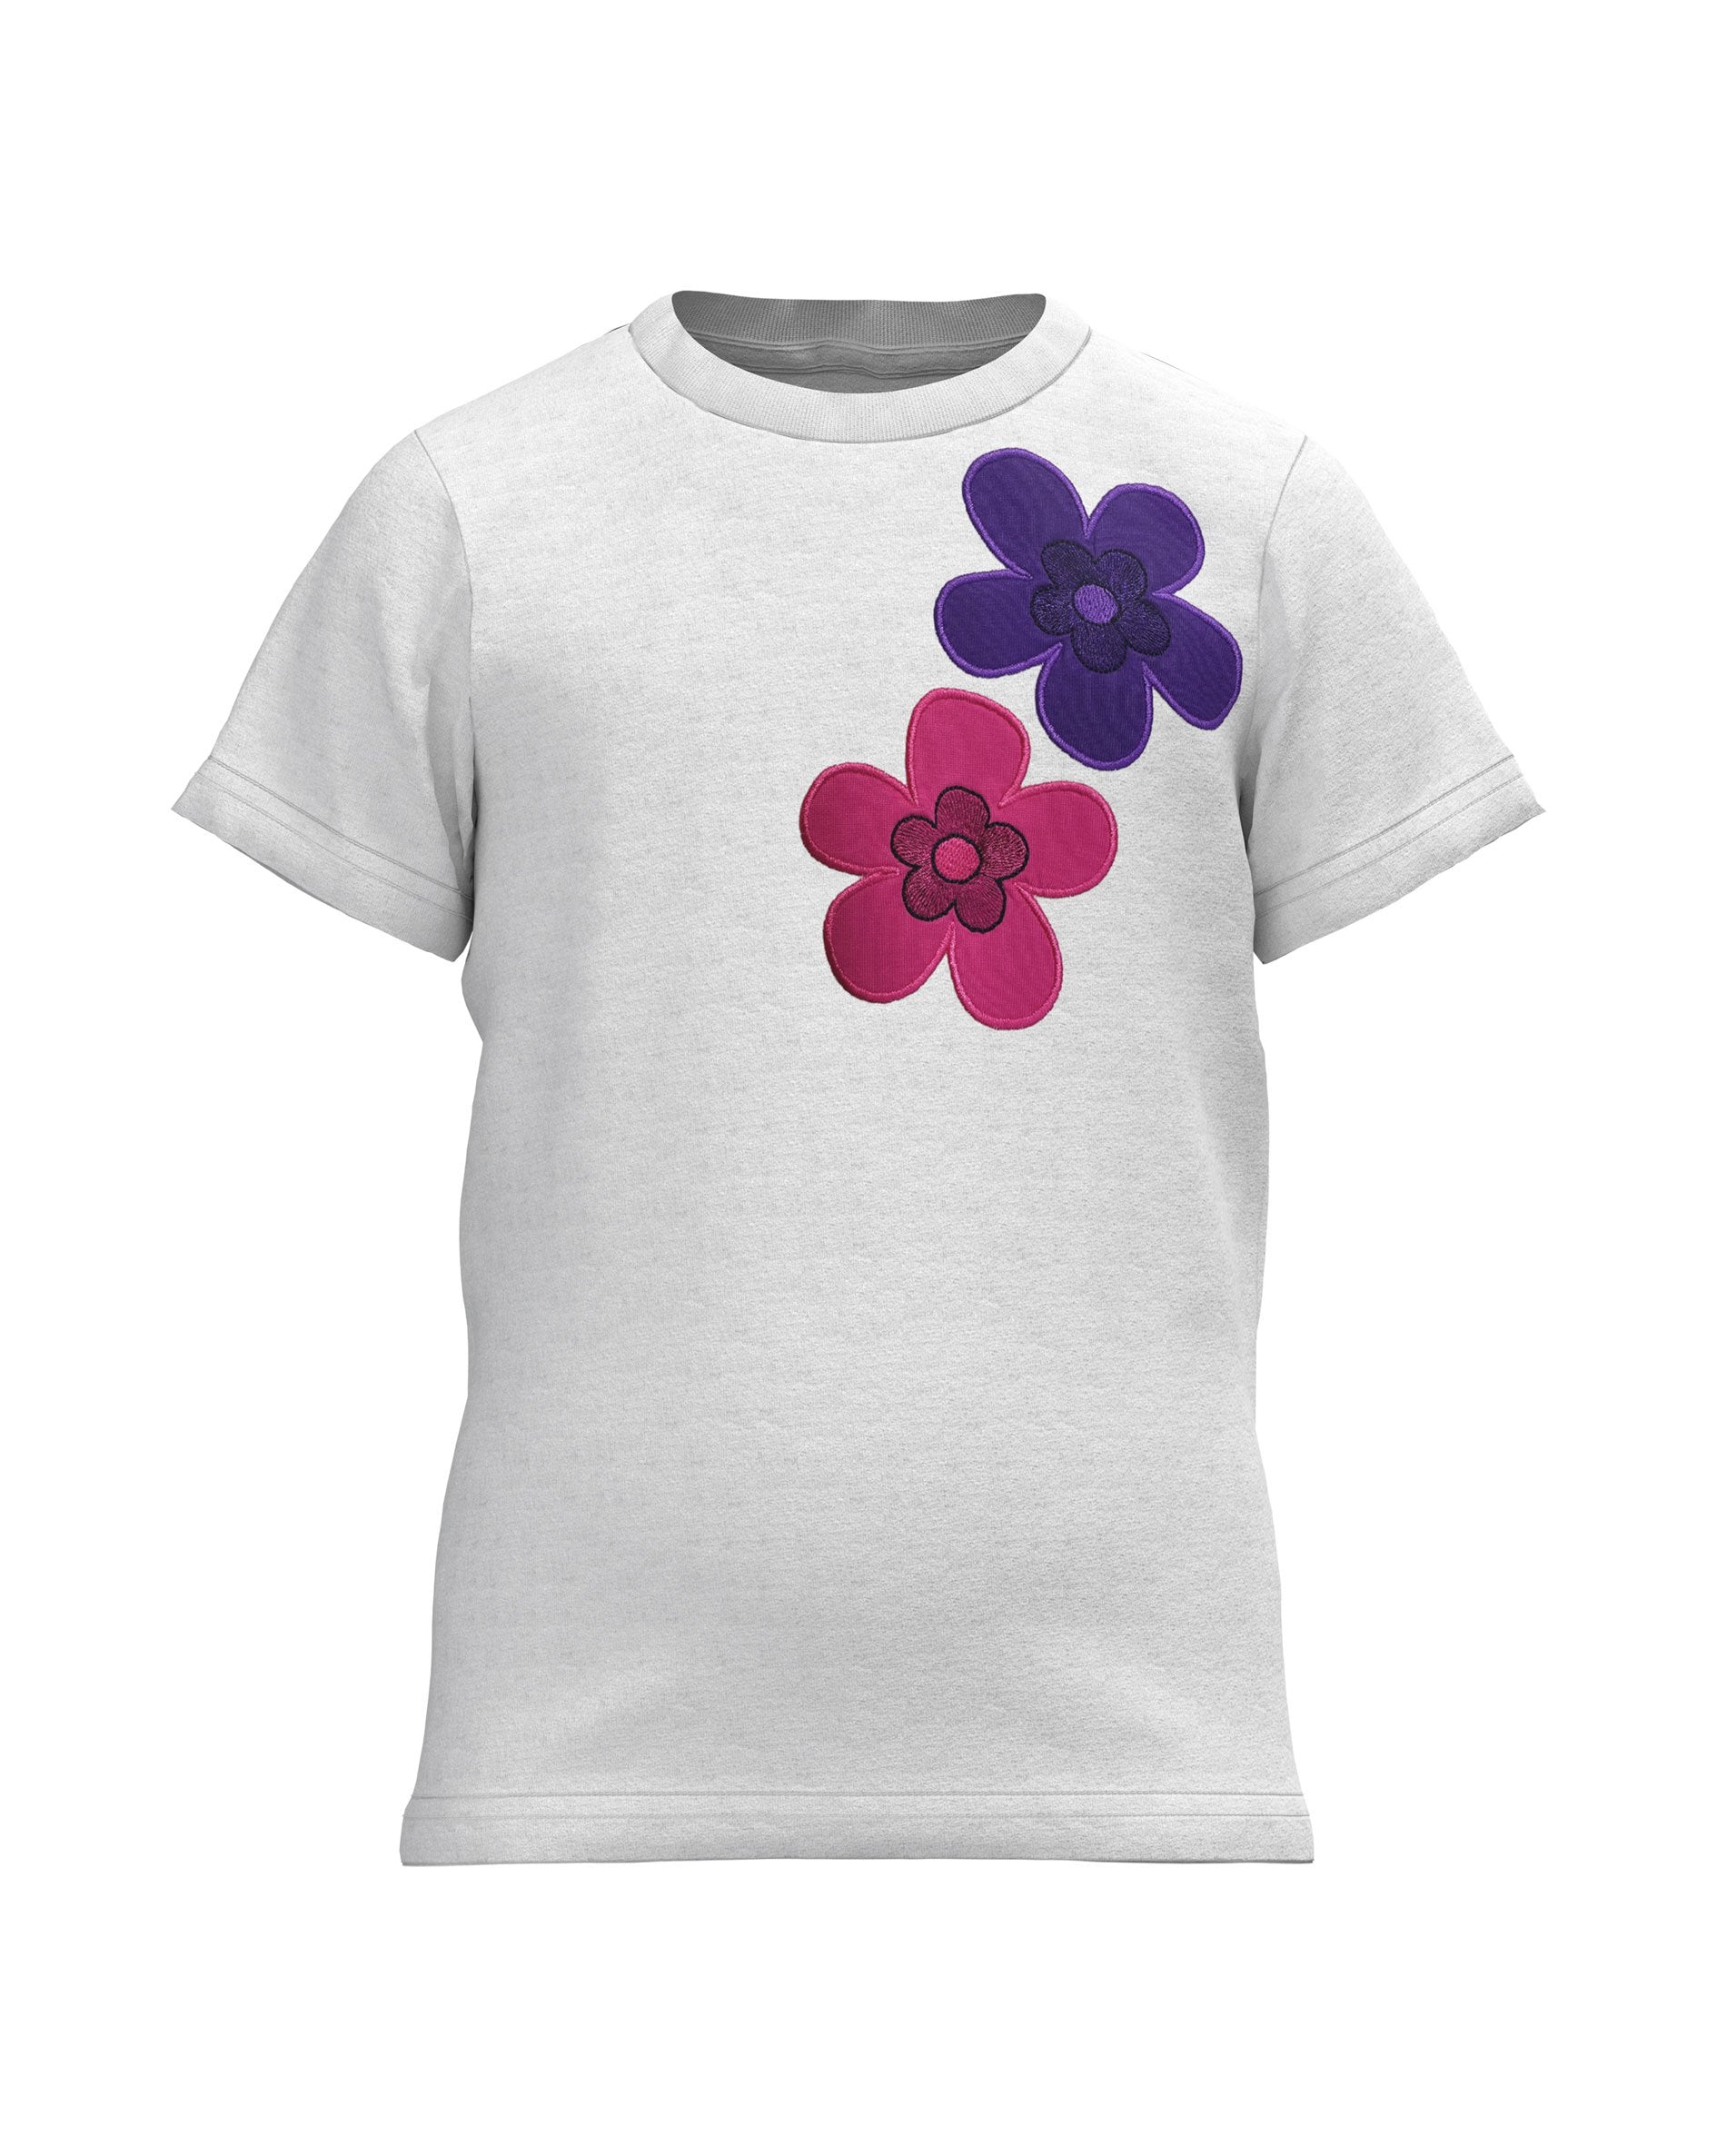 – Tops and Girls School Cotonly T-shirts